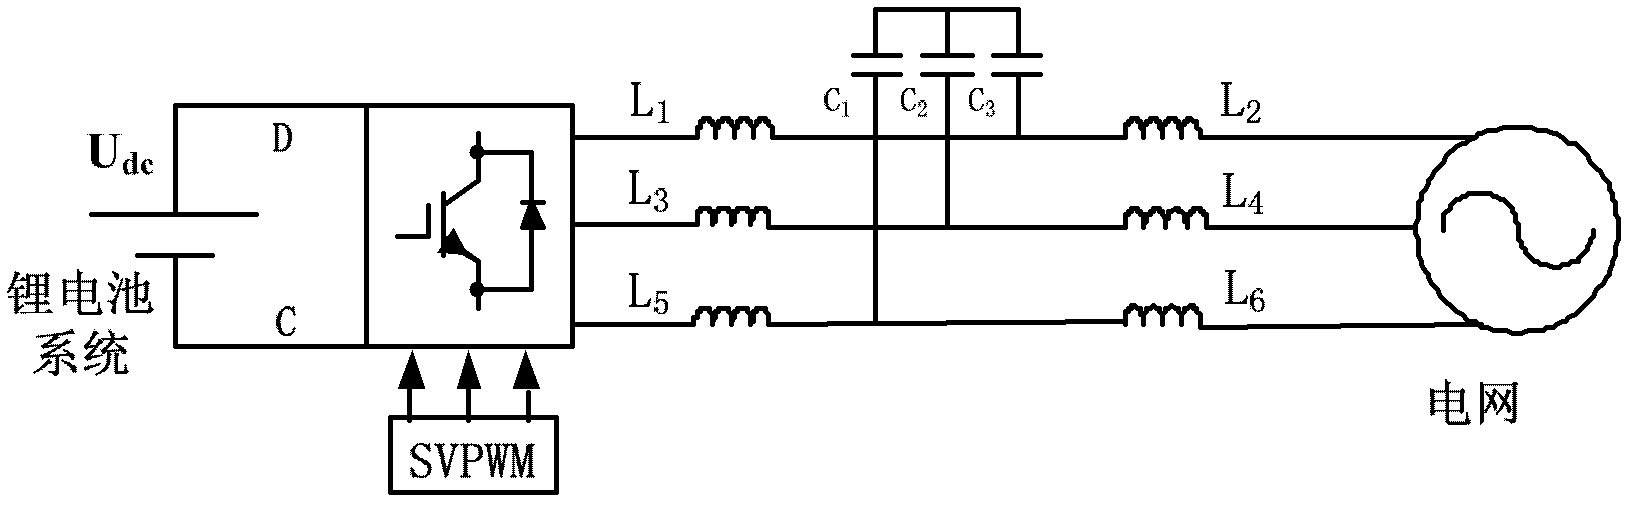 Power conversion system based on energy storage of lithium battery and control method thereof